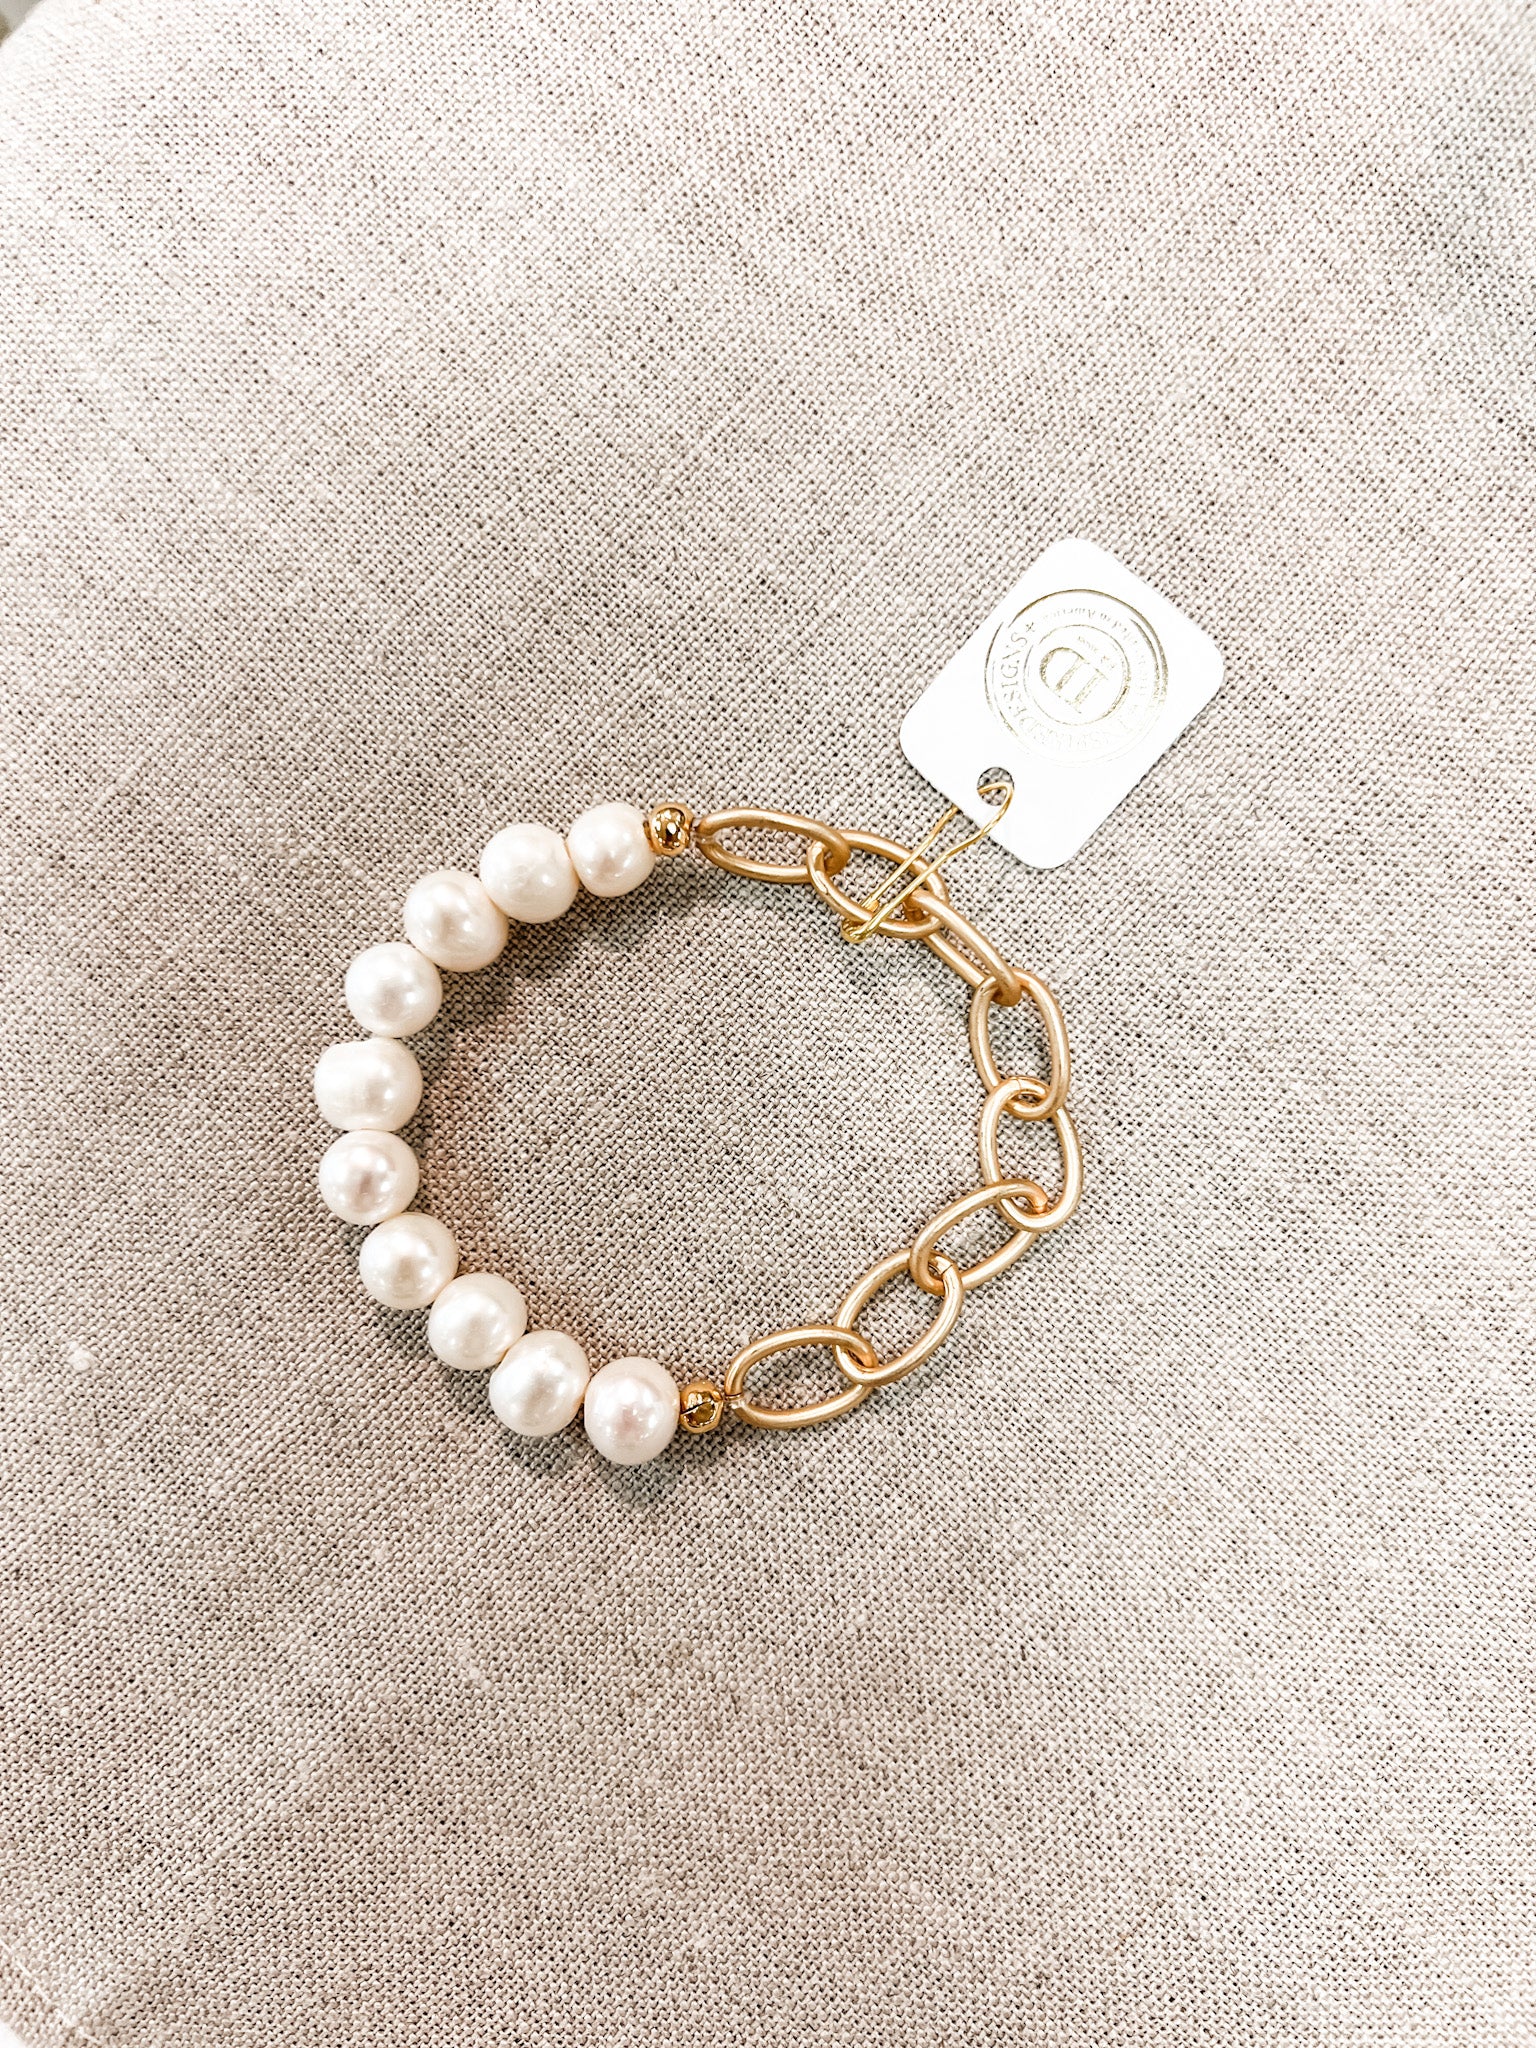 Pearl and Chain Link Bracelet